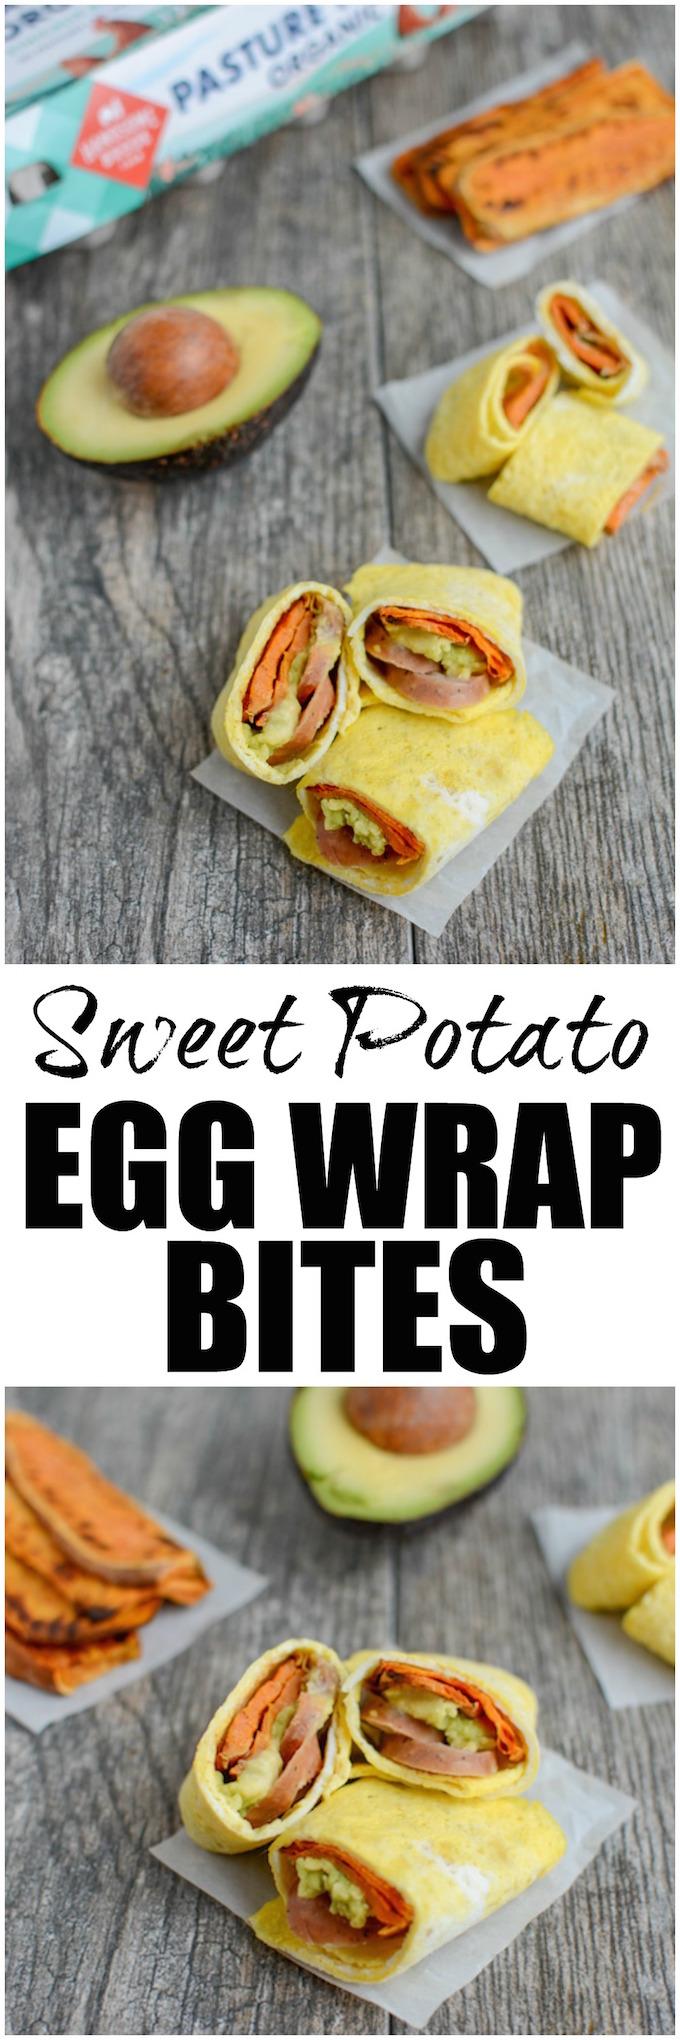 These Sweet Potato Egg Wrap Bites make an easy, healthy breakfast, lunch or snack. They're kid-friendly and can be prepped ahead of time so they come together quickly!